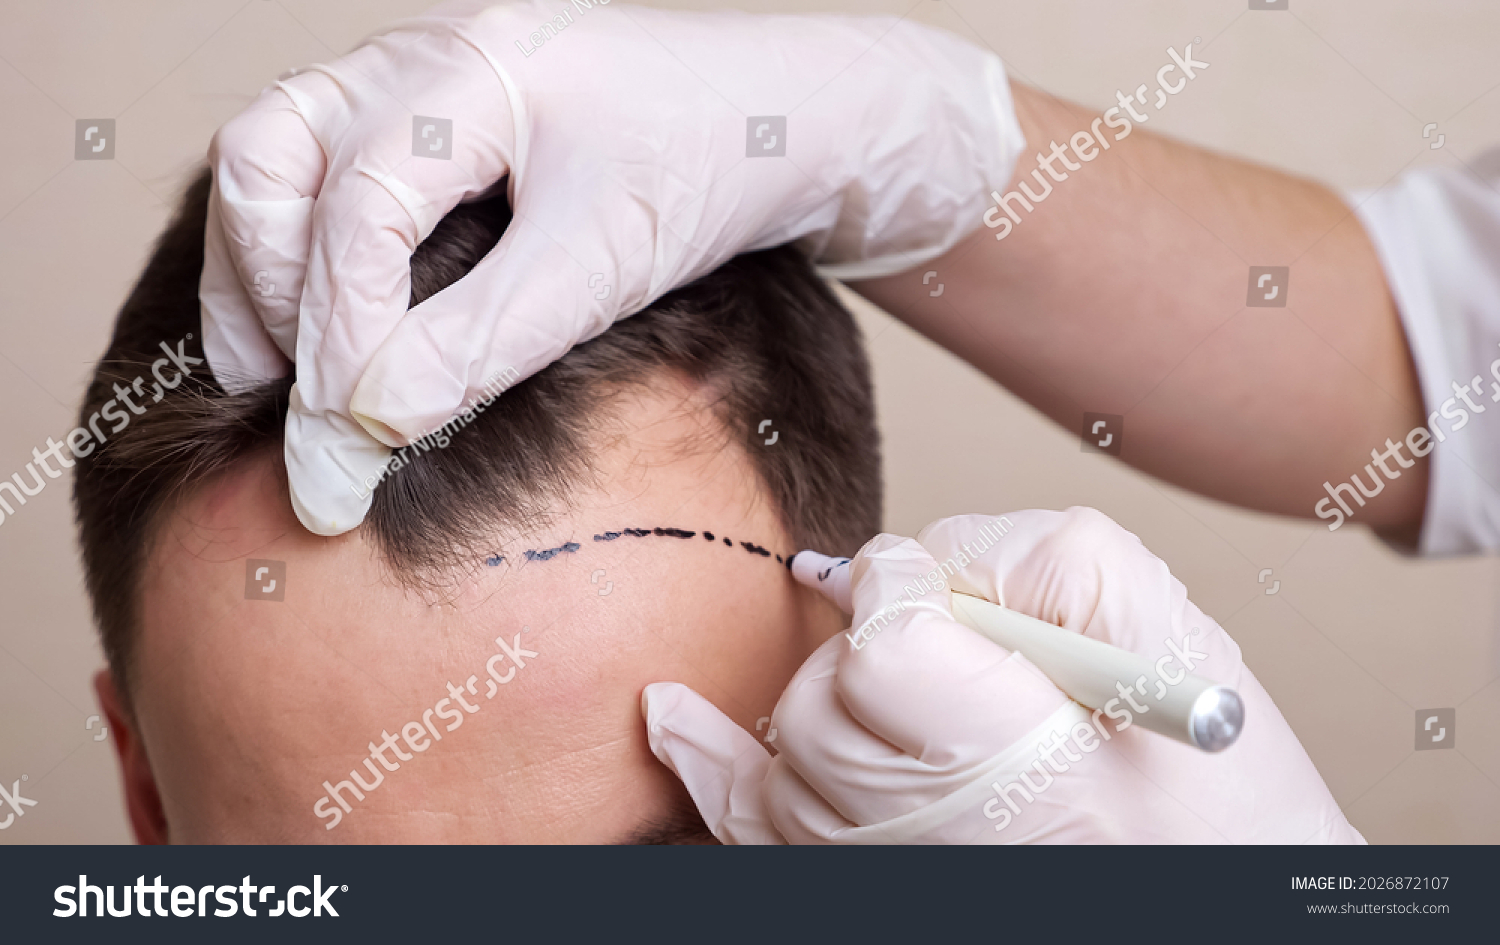 medical professional with gloves draws a dotted line on the head of a balding man. #2026872107